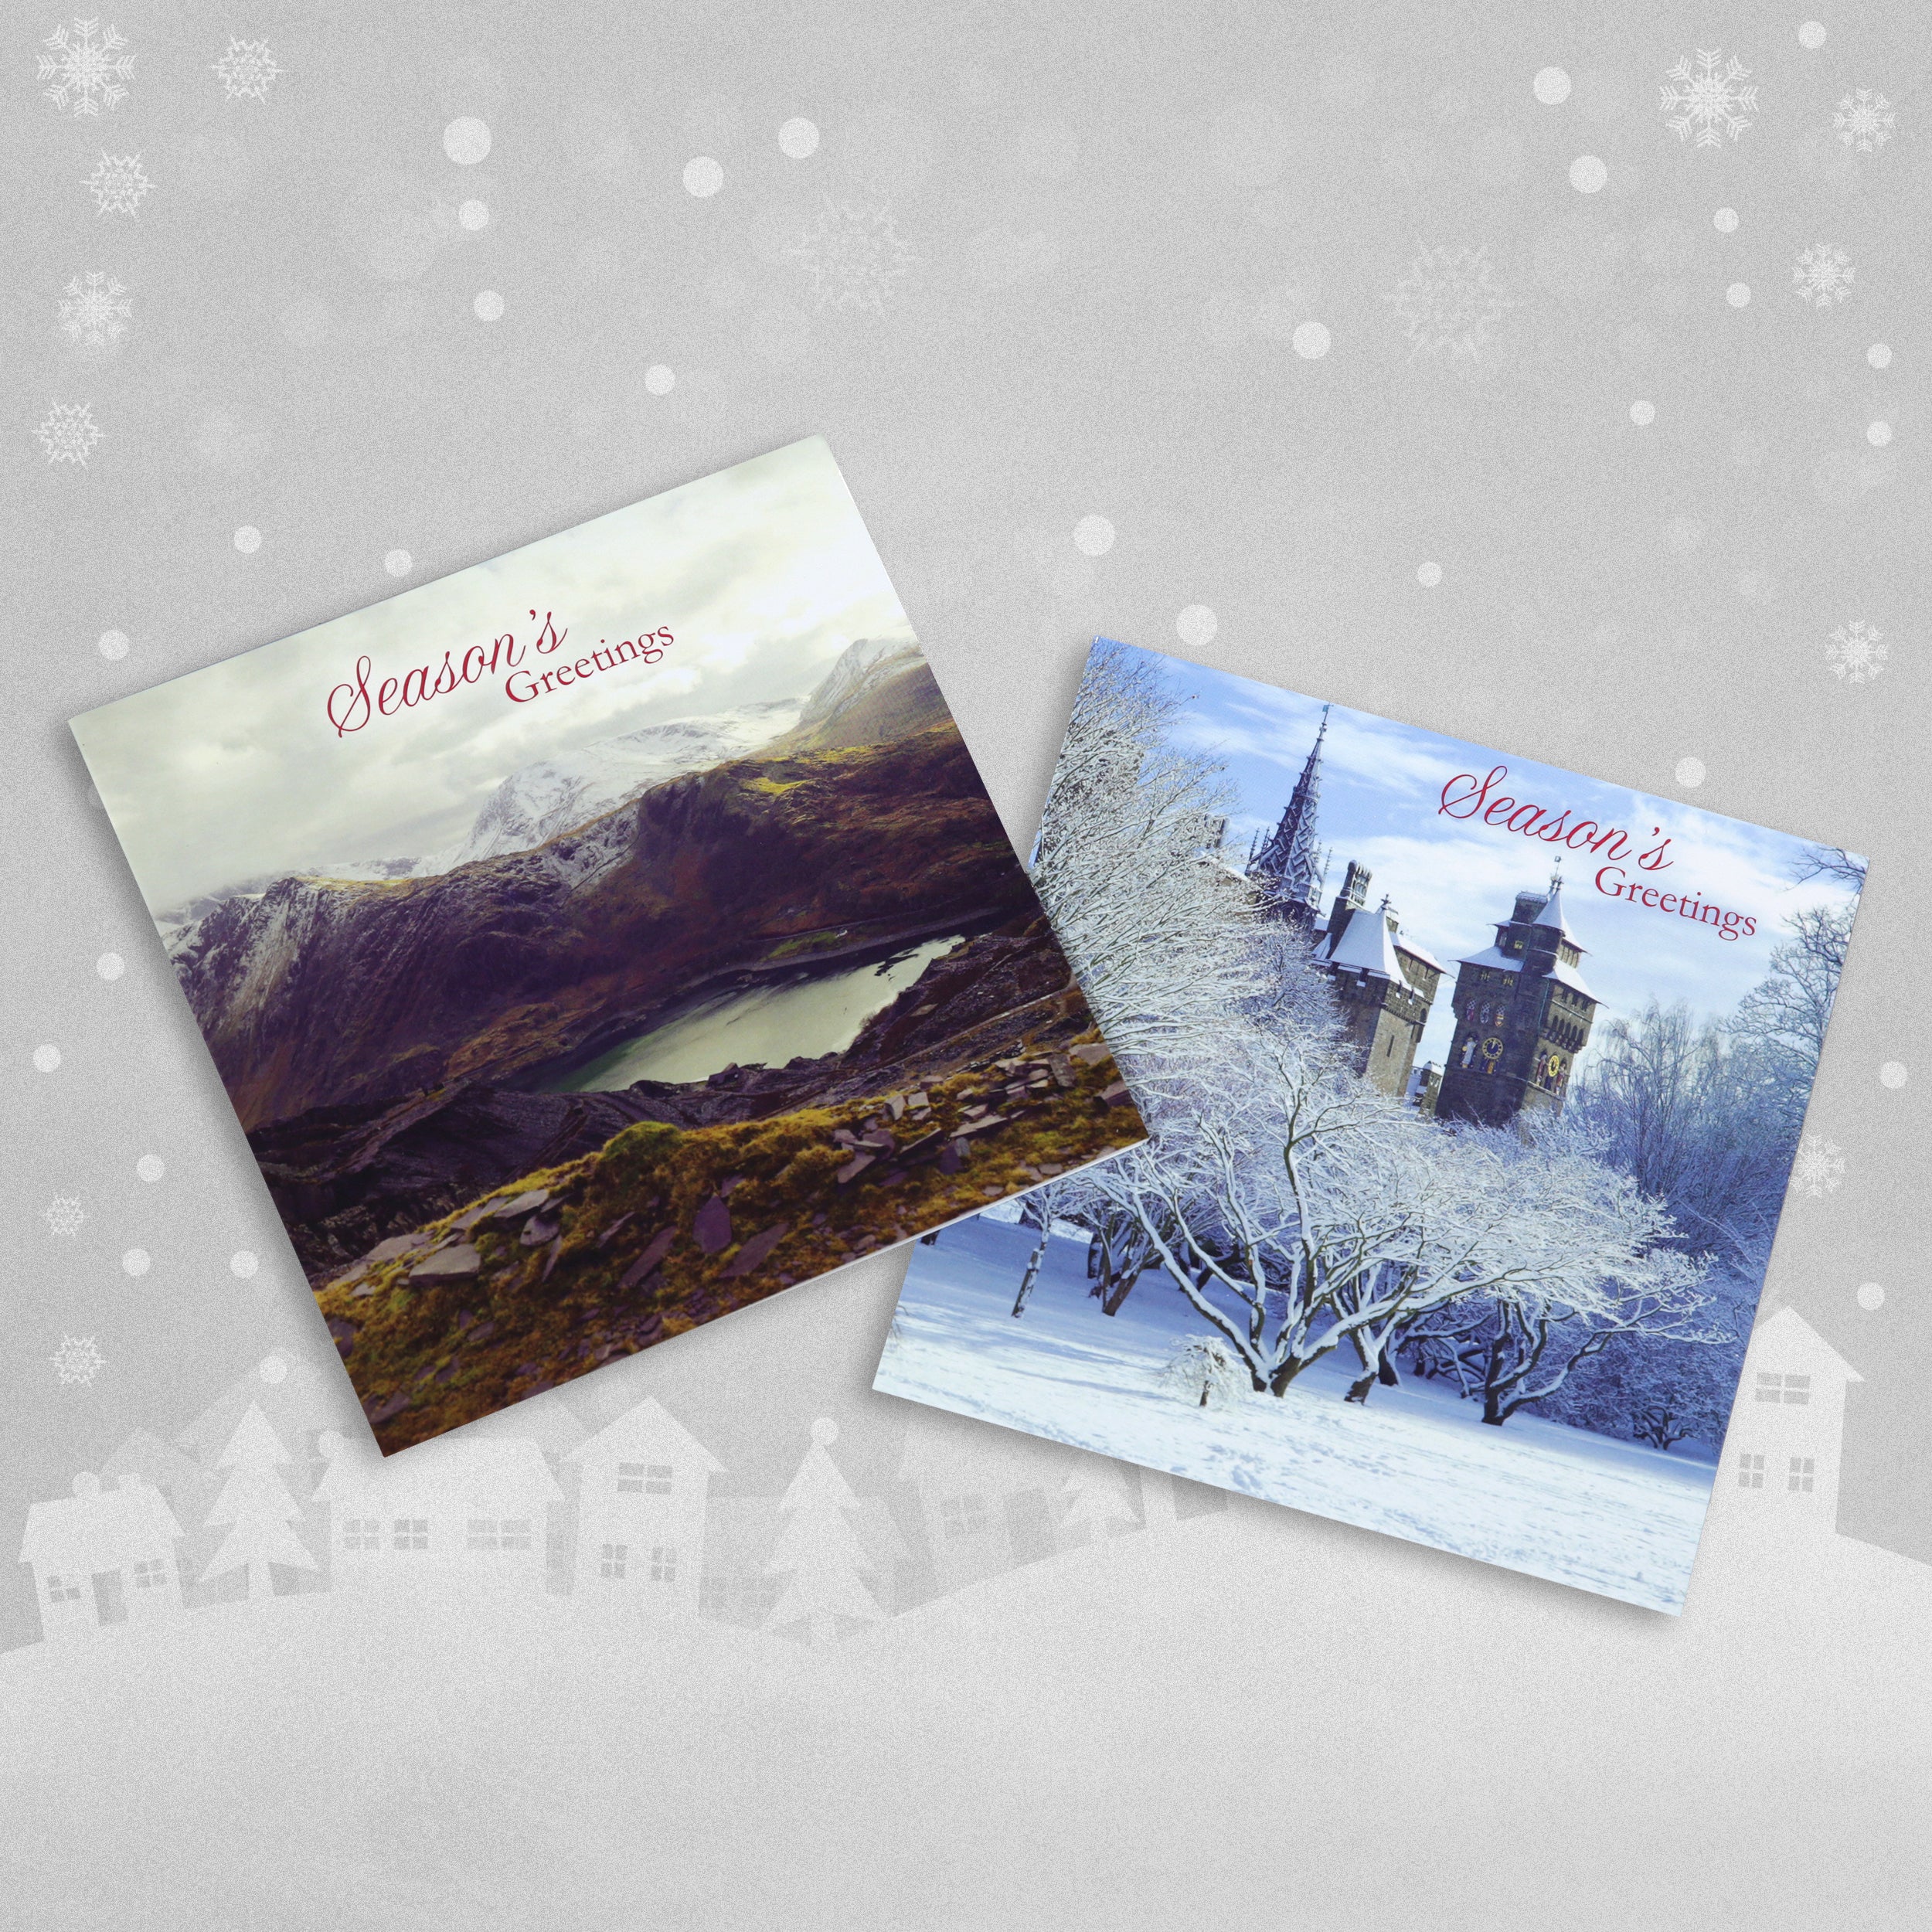 10 'Wales' Christmas Cards - Snowdonia & Cardiff Castle